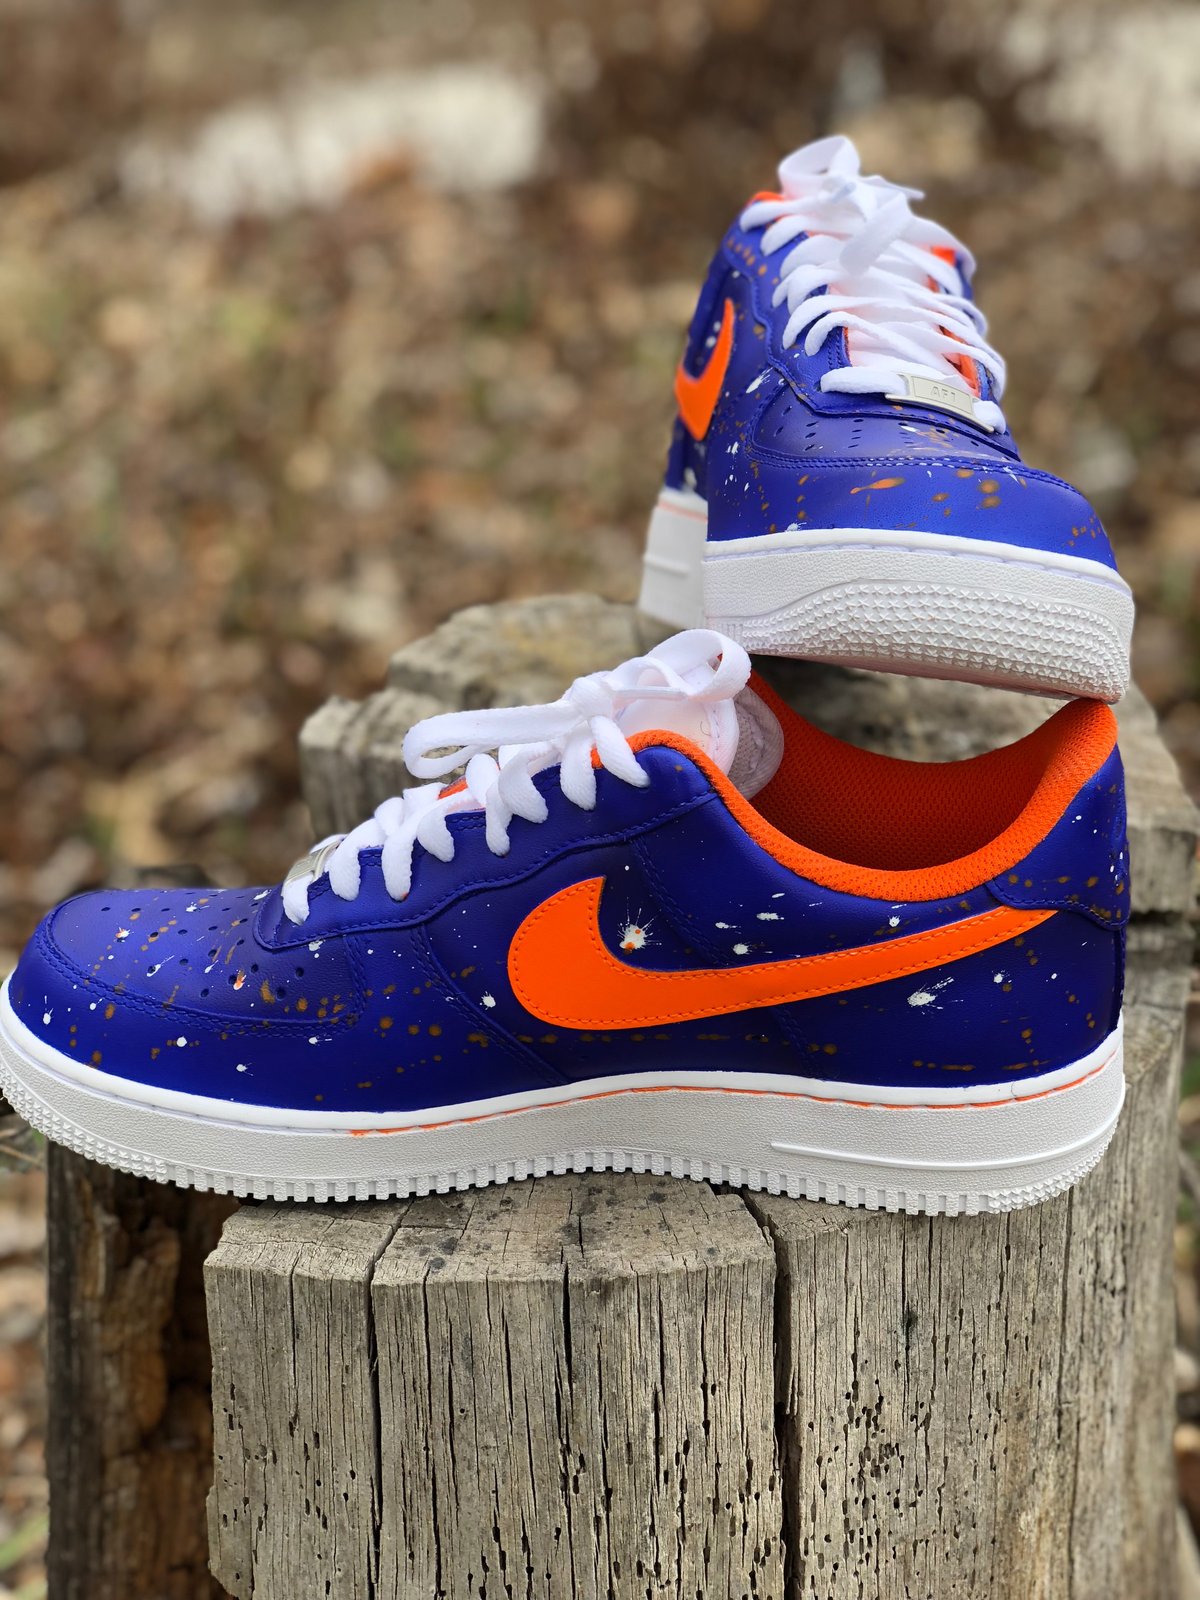 colorful air force 1s